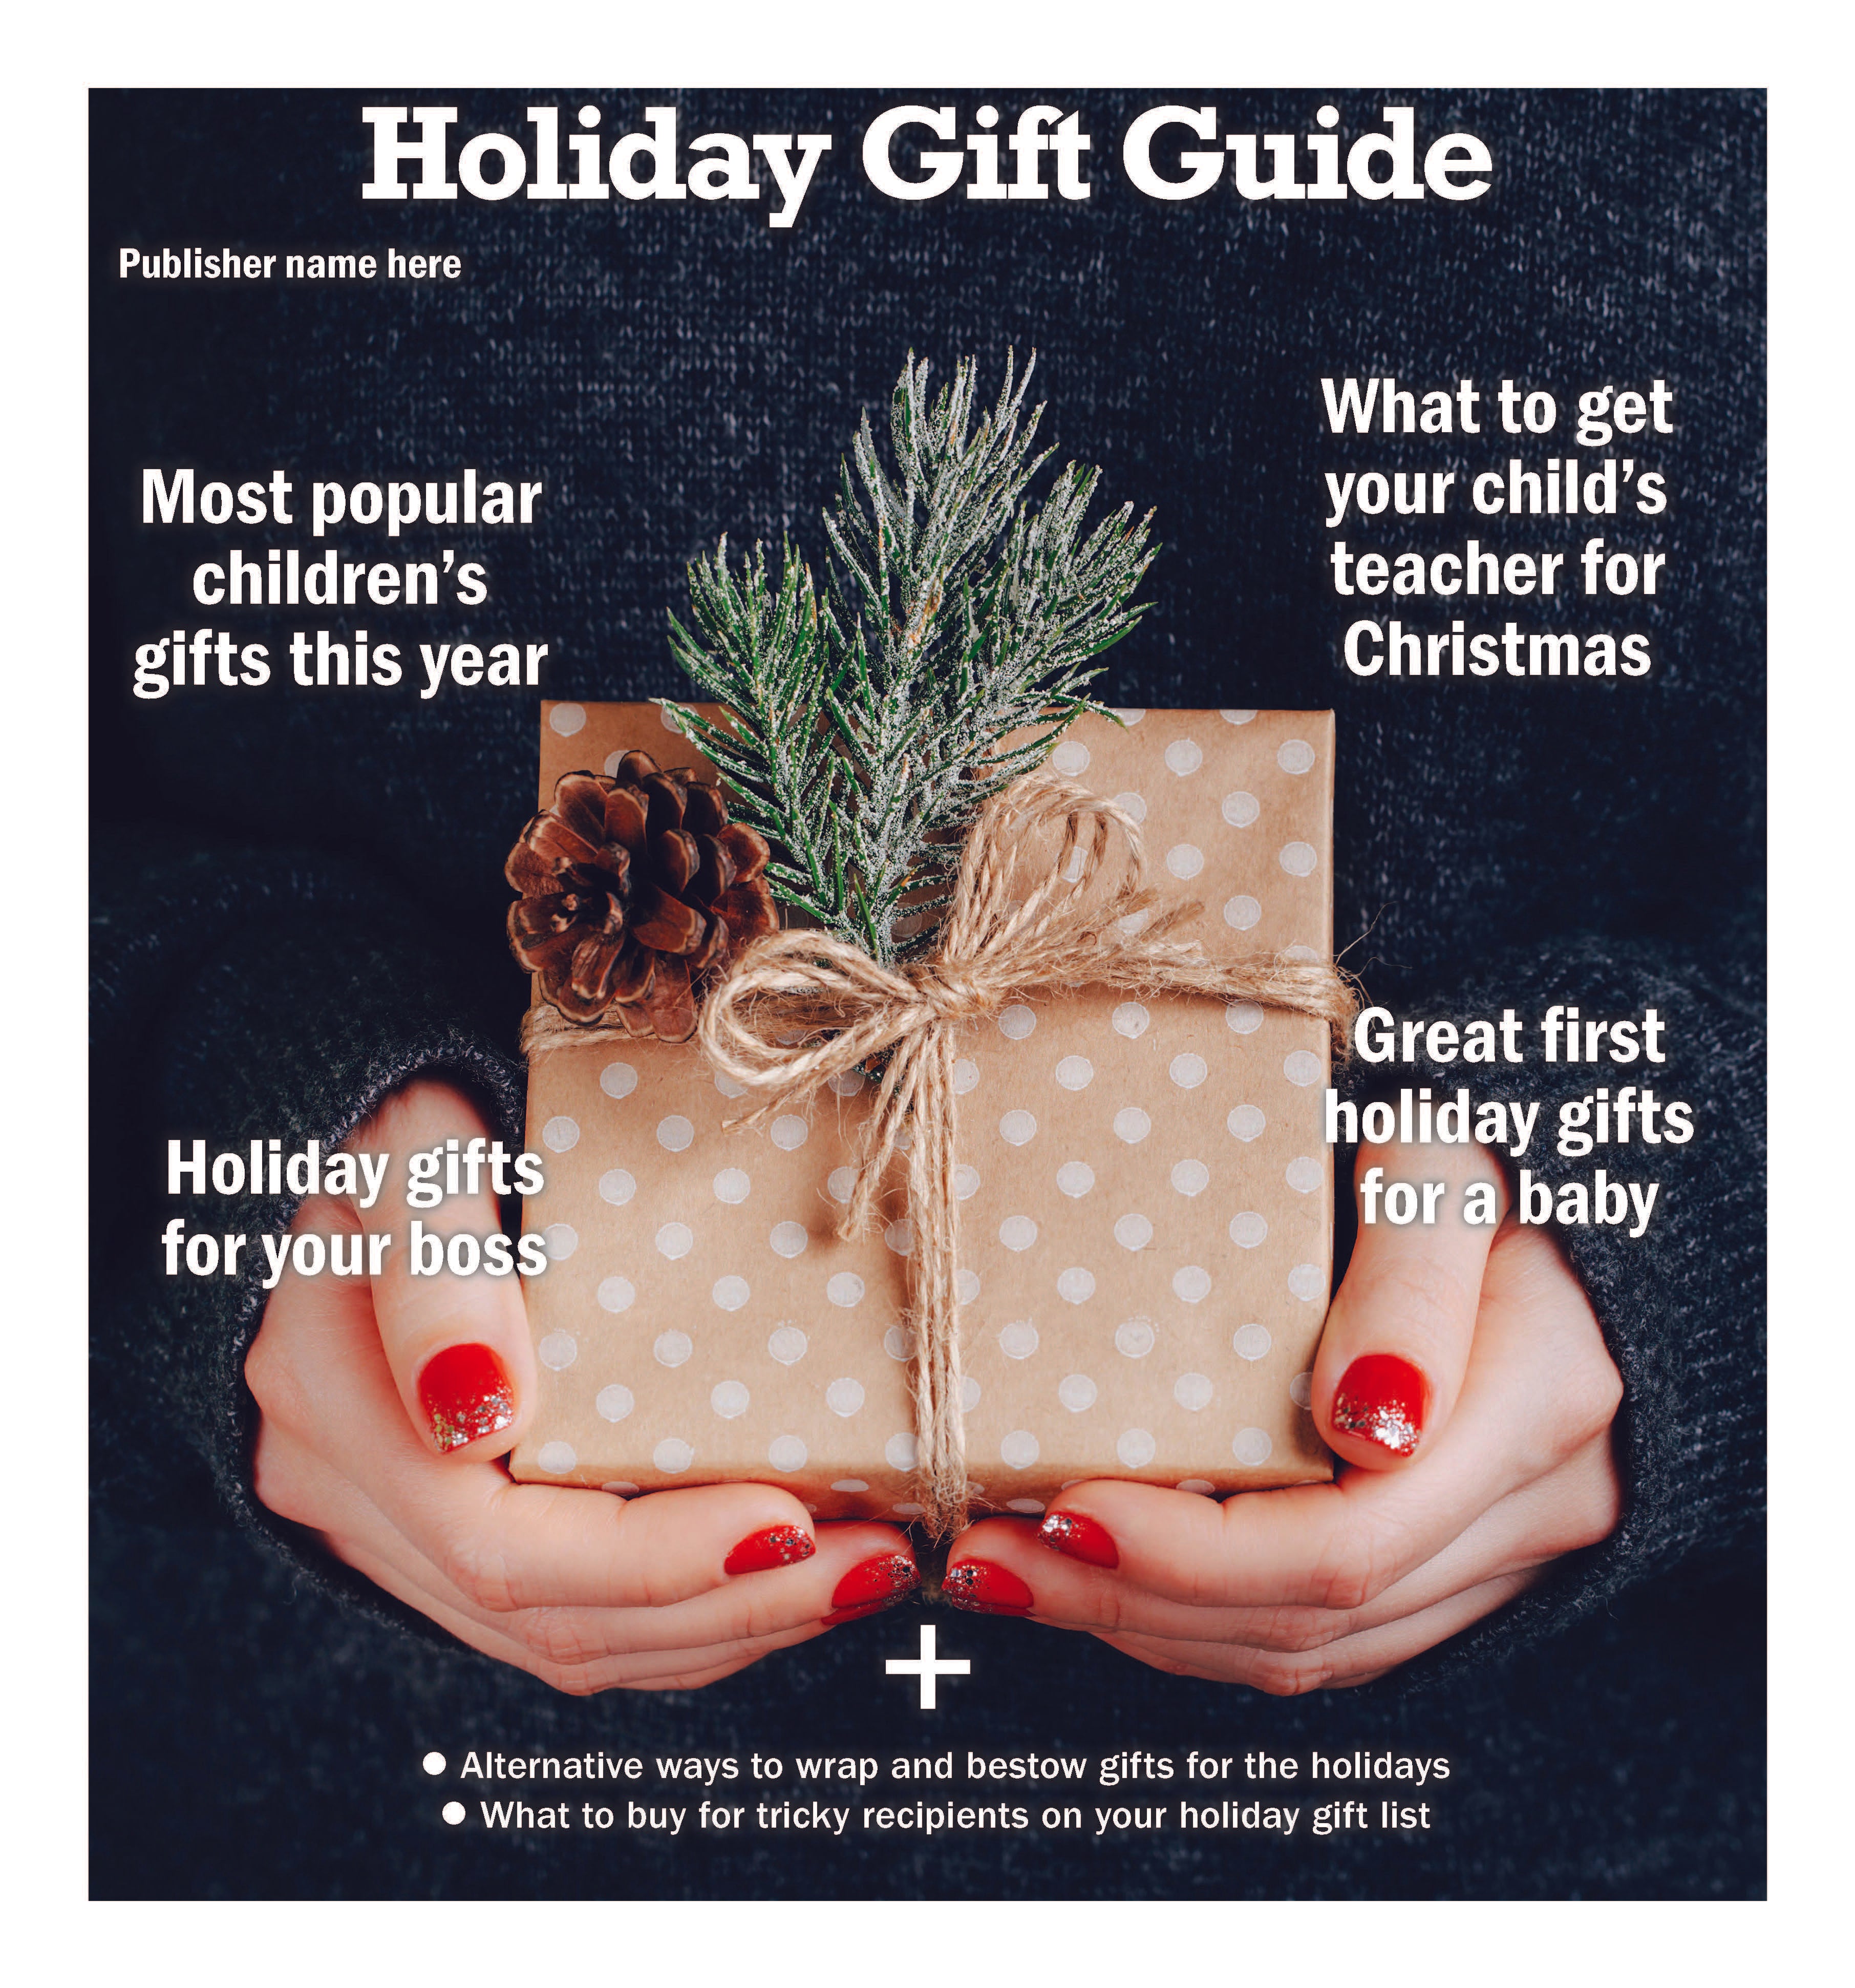 2023 Holiday Gift Guide - The Content Store